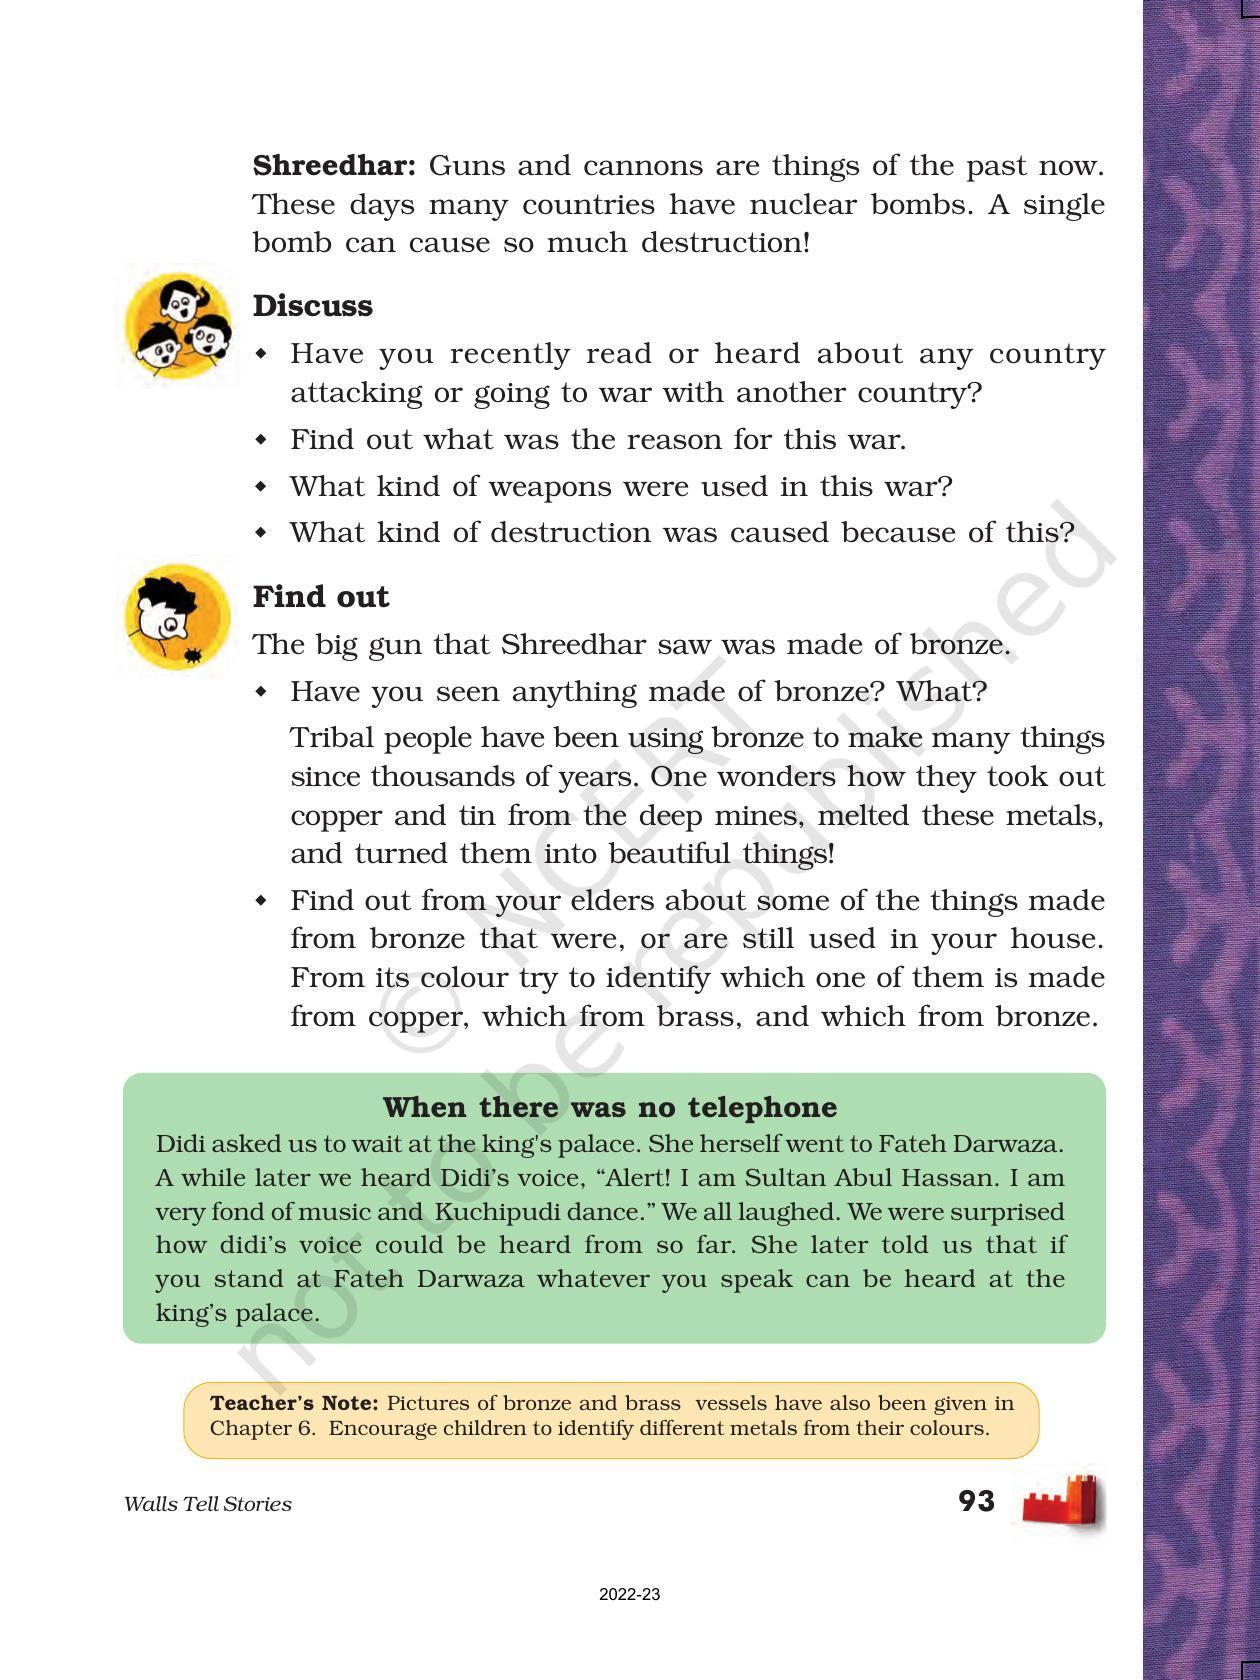 NCERT Book for Class 5 EVS Chapter 10 Walls Tell Stories - Page 7